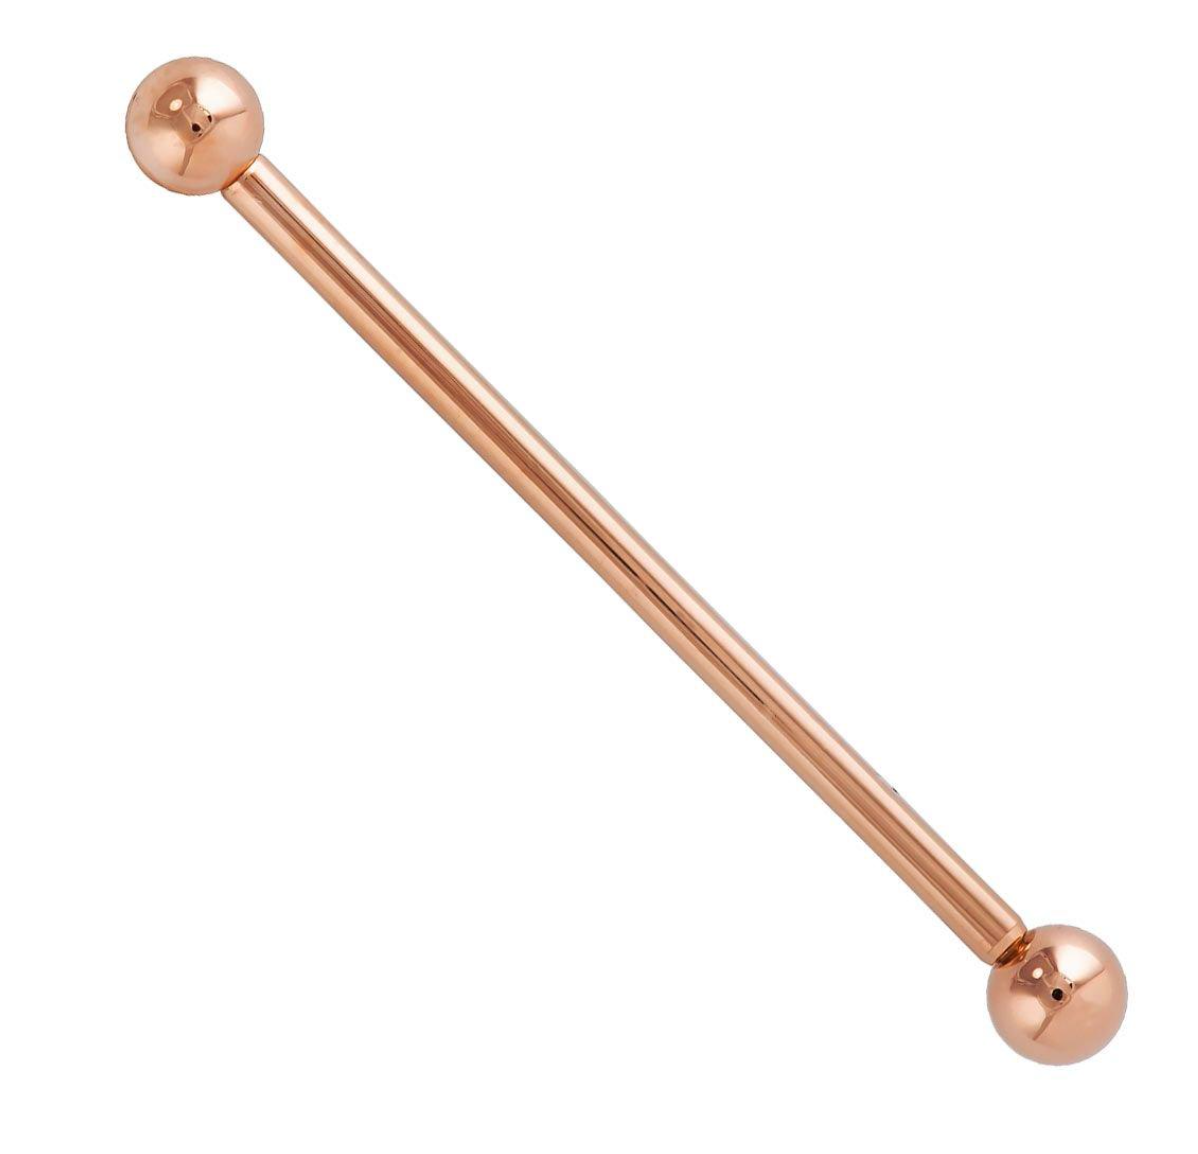 14K Solid Gold Industrial Barbell